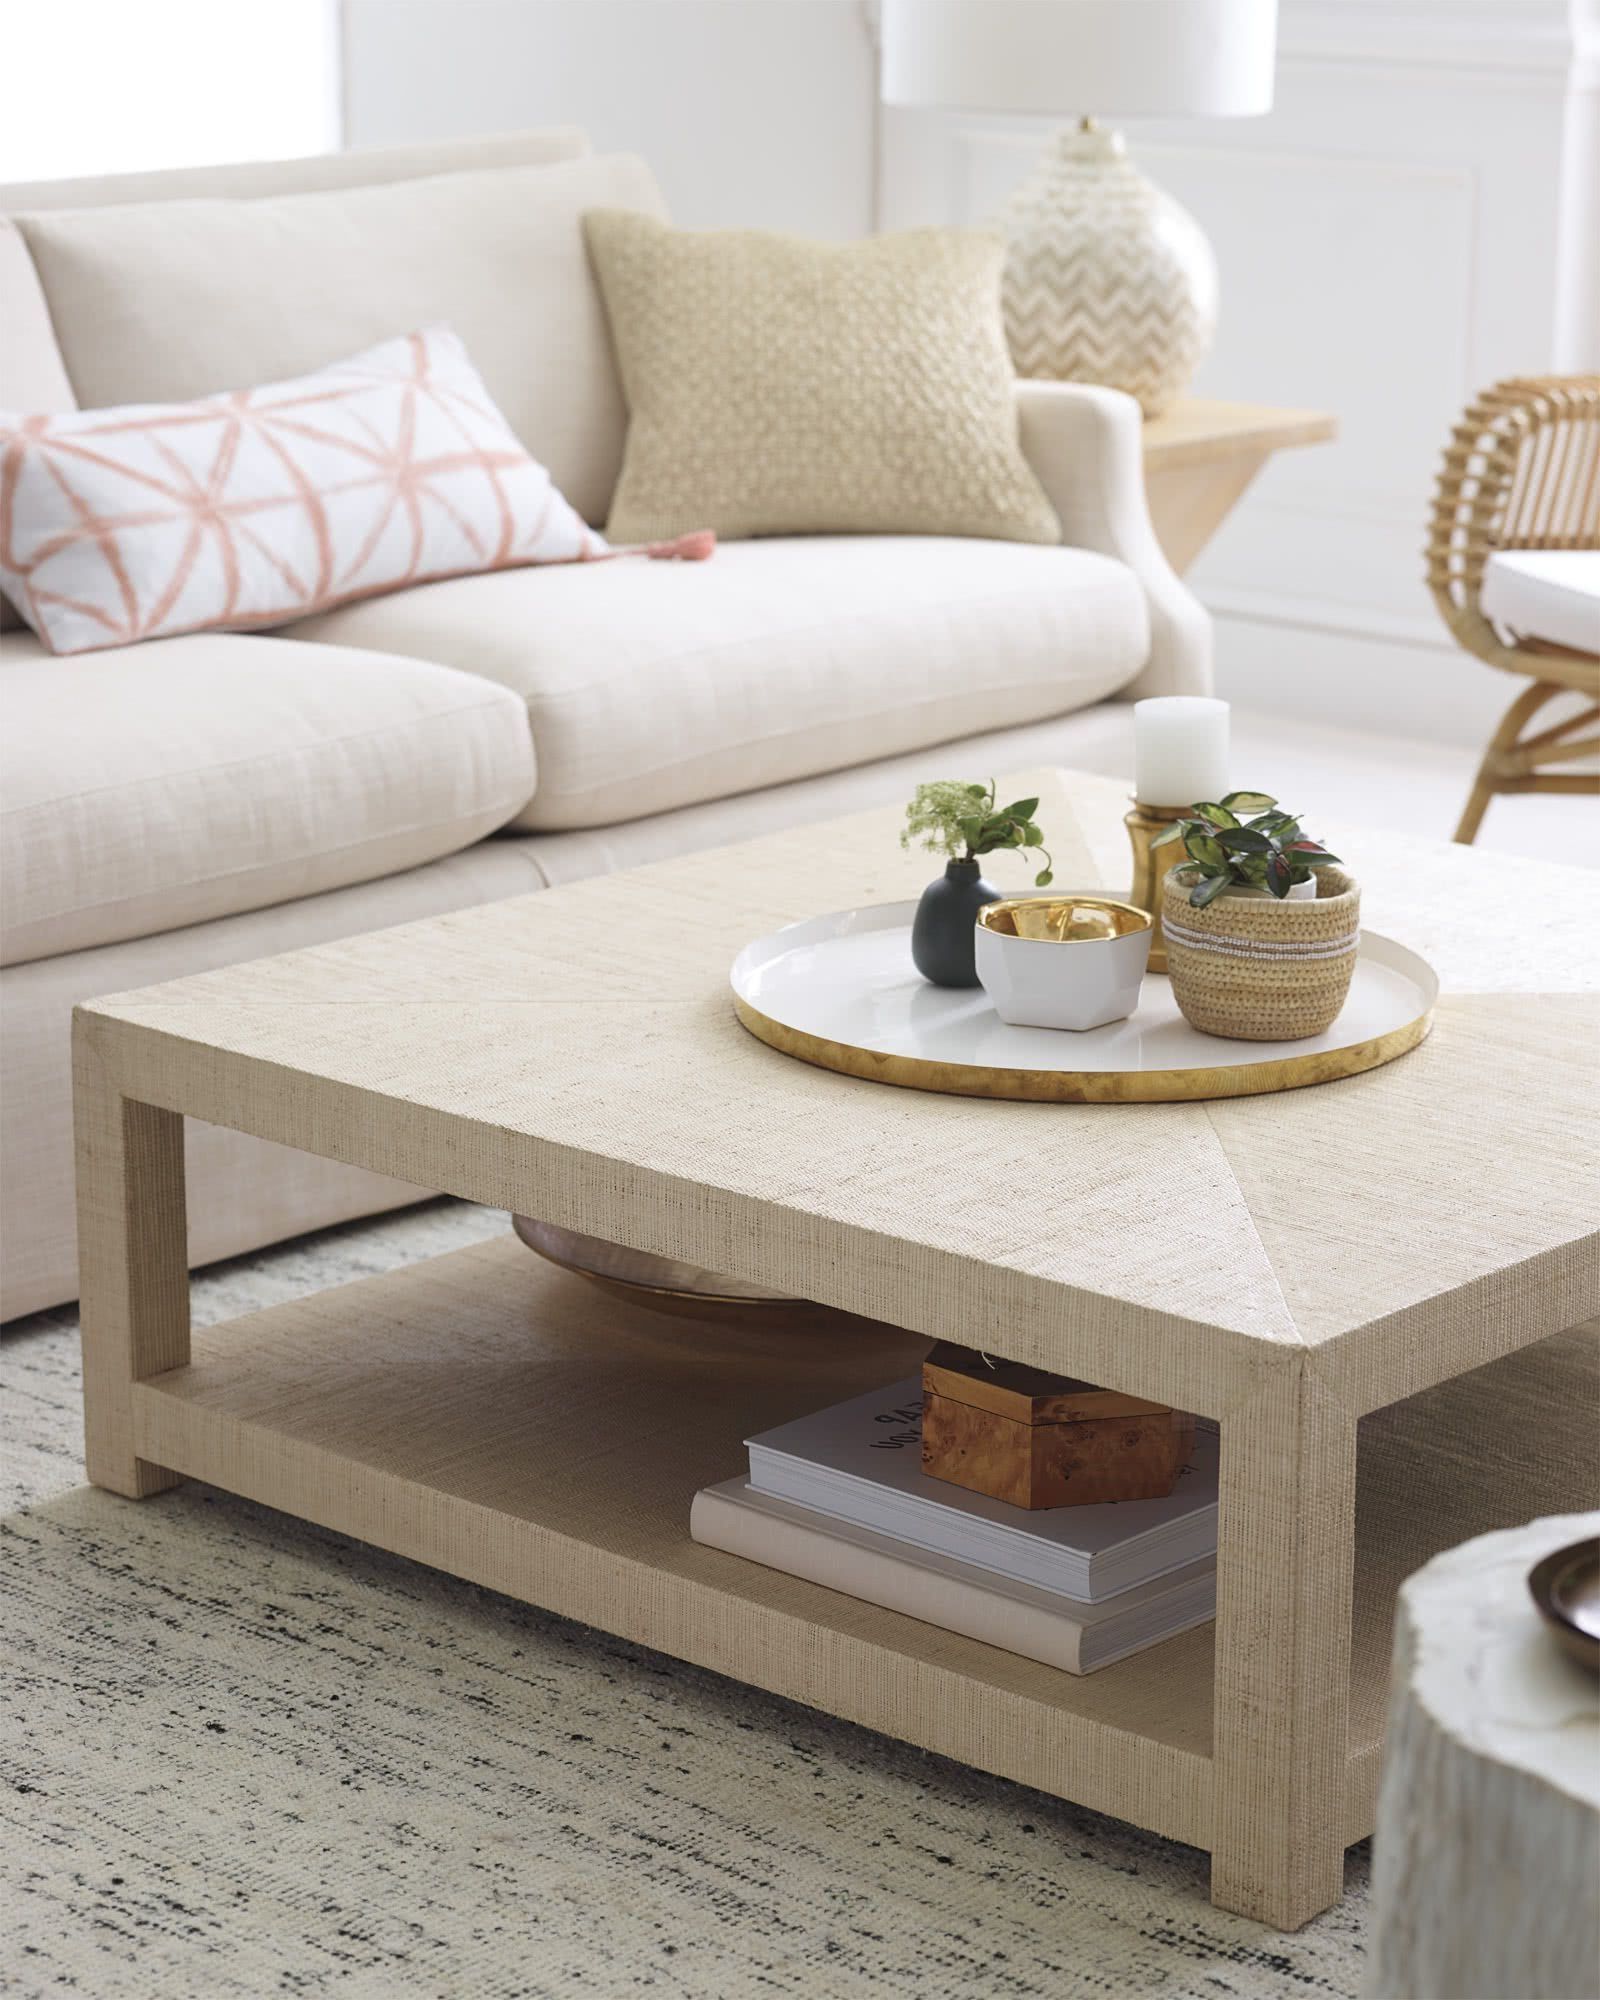 How To Decorate Your Square Coffee Table With Style – Coffee Table Decor Pertaining To Transitional Square Coffee Tables (Gallery 13 of 20)